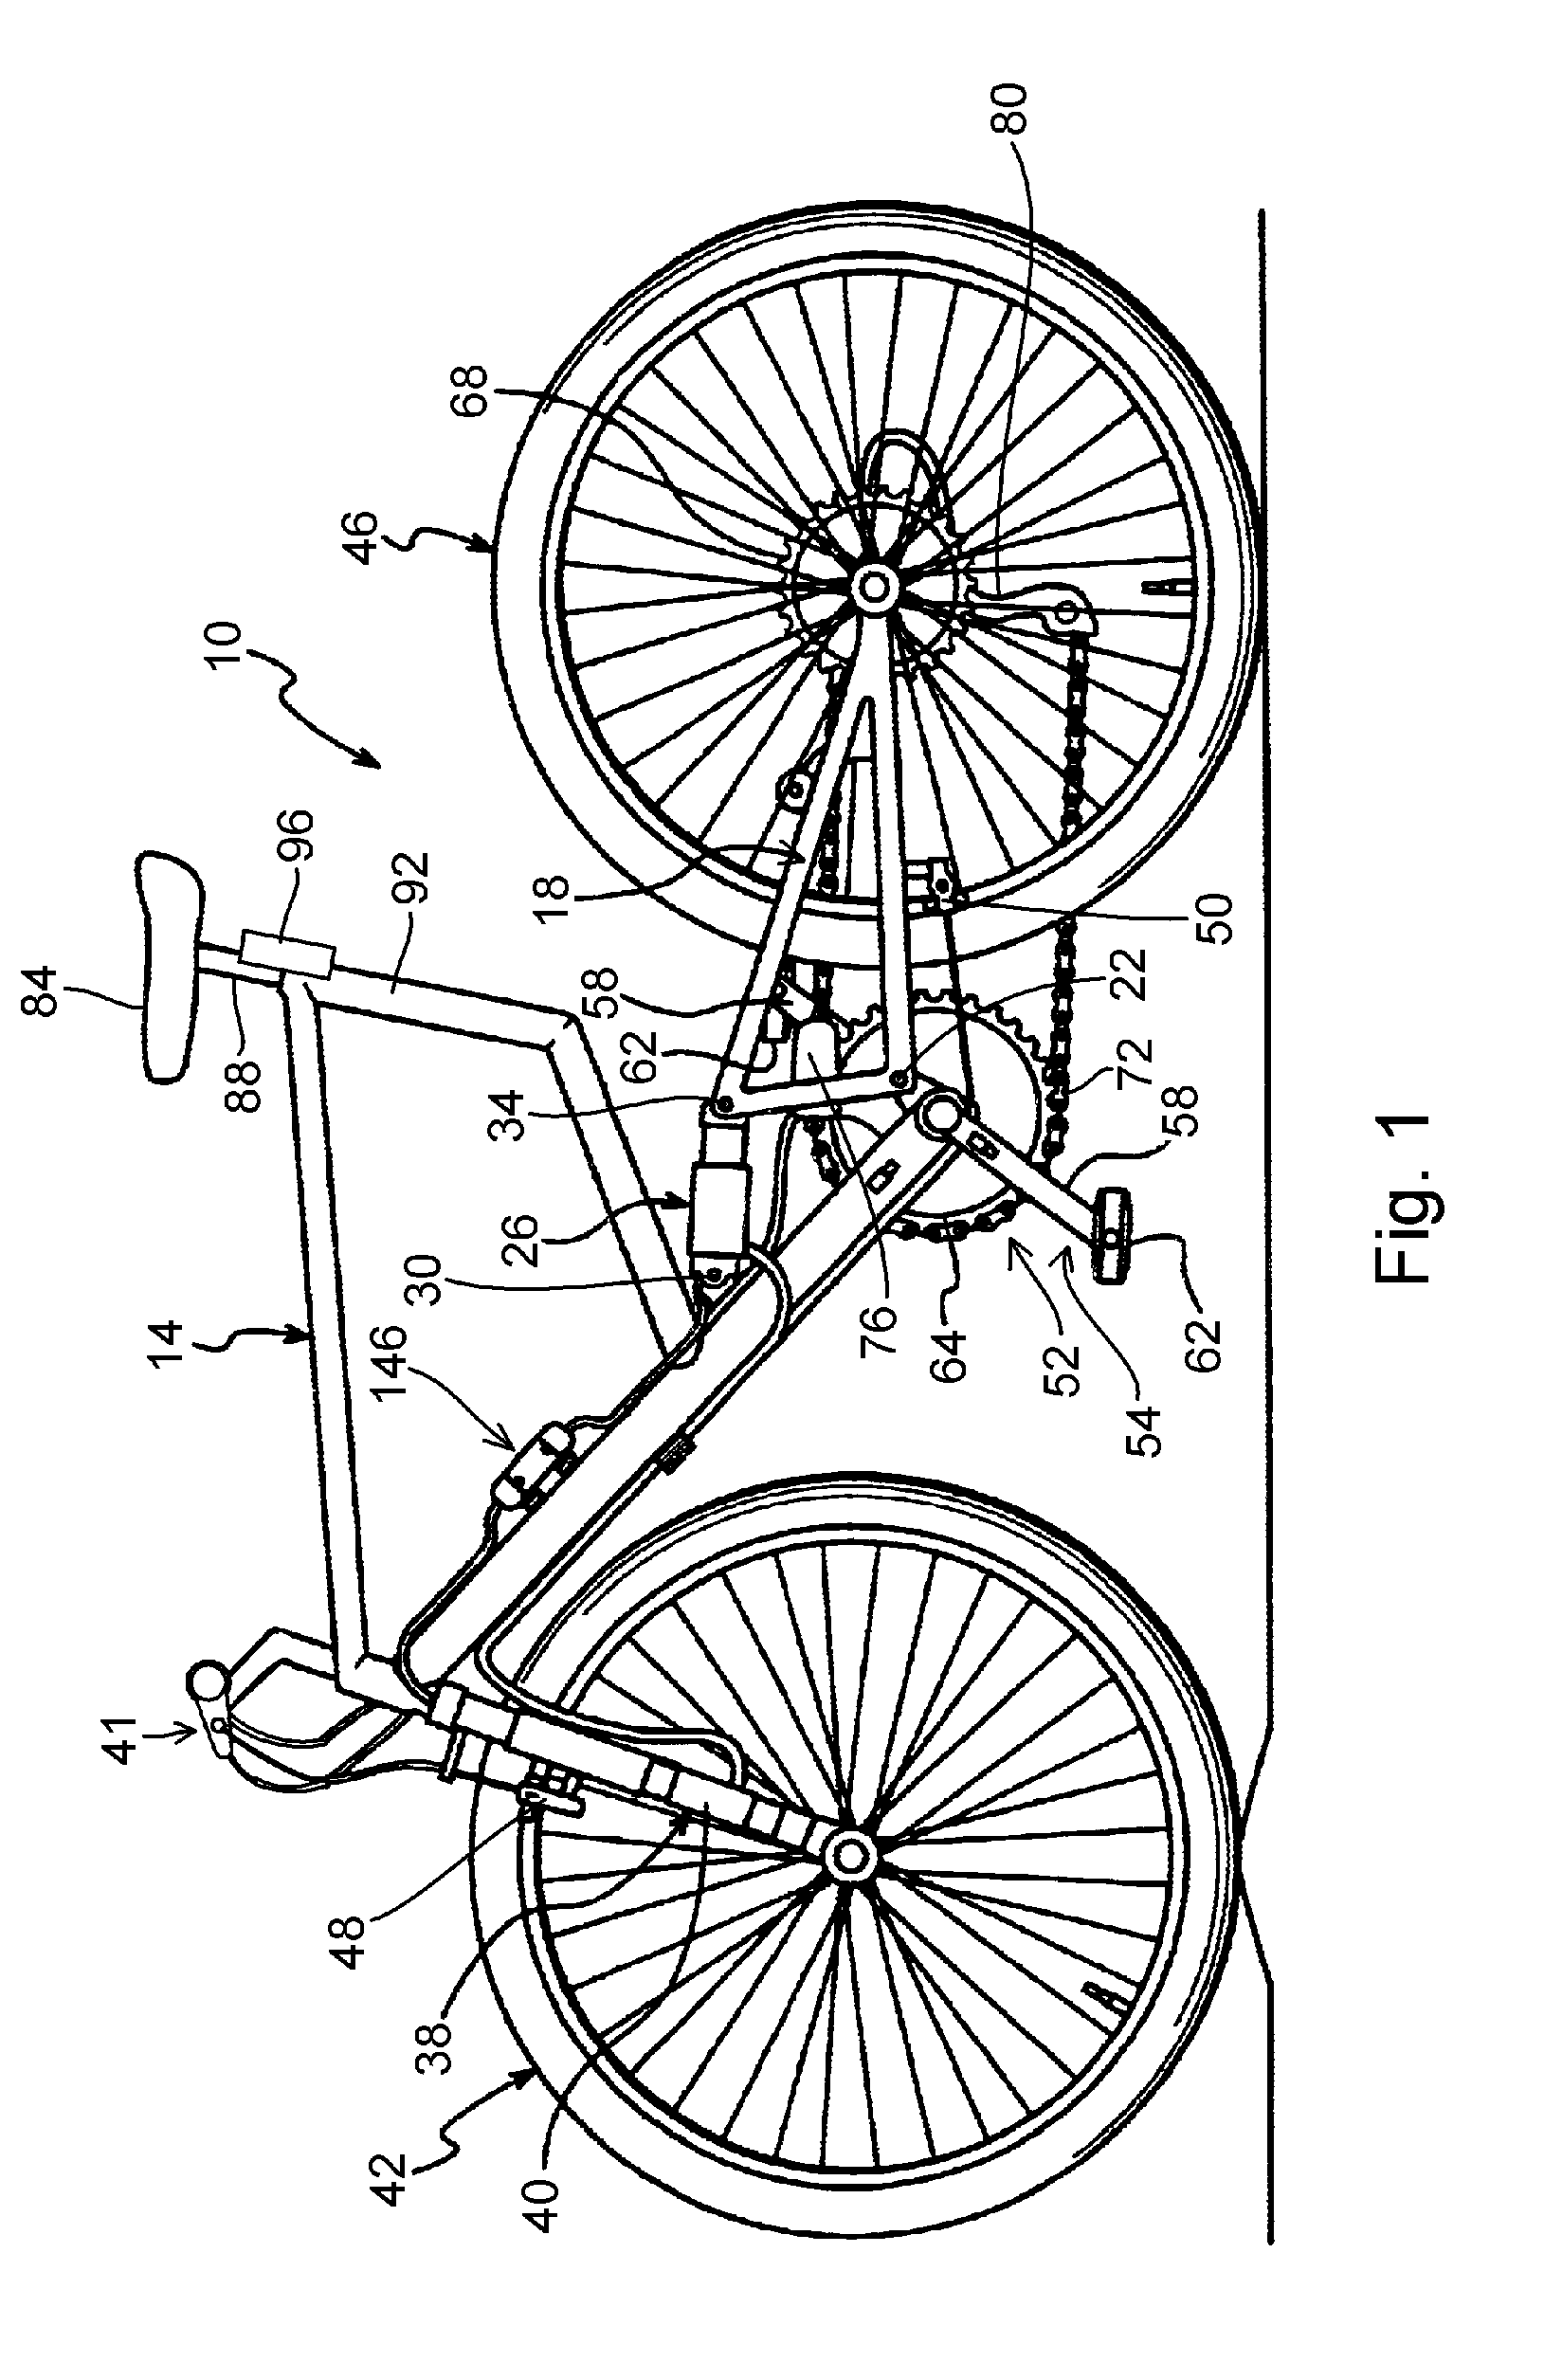 Apparatus for controlling a bicycle suspension element